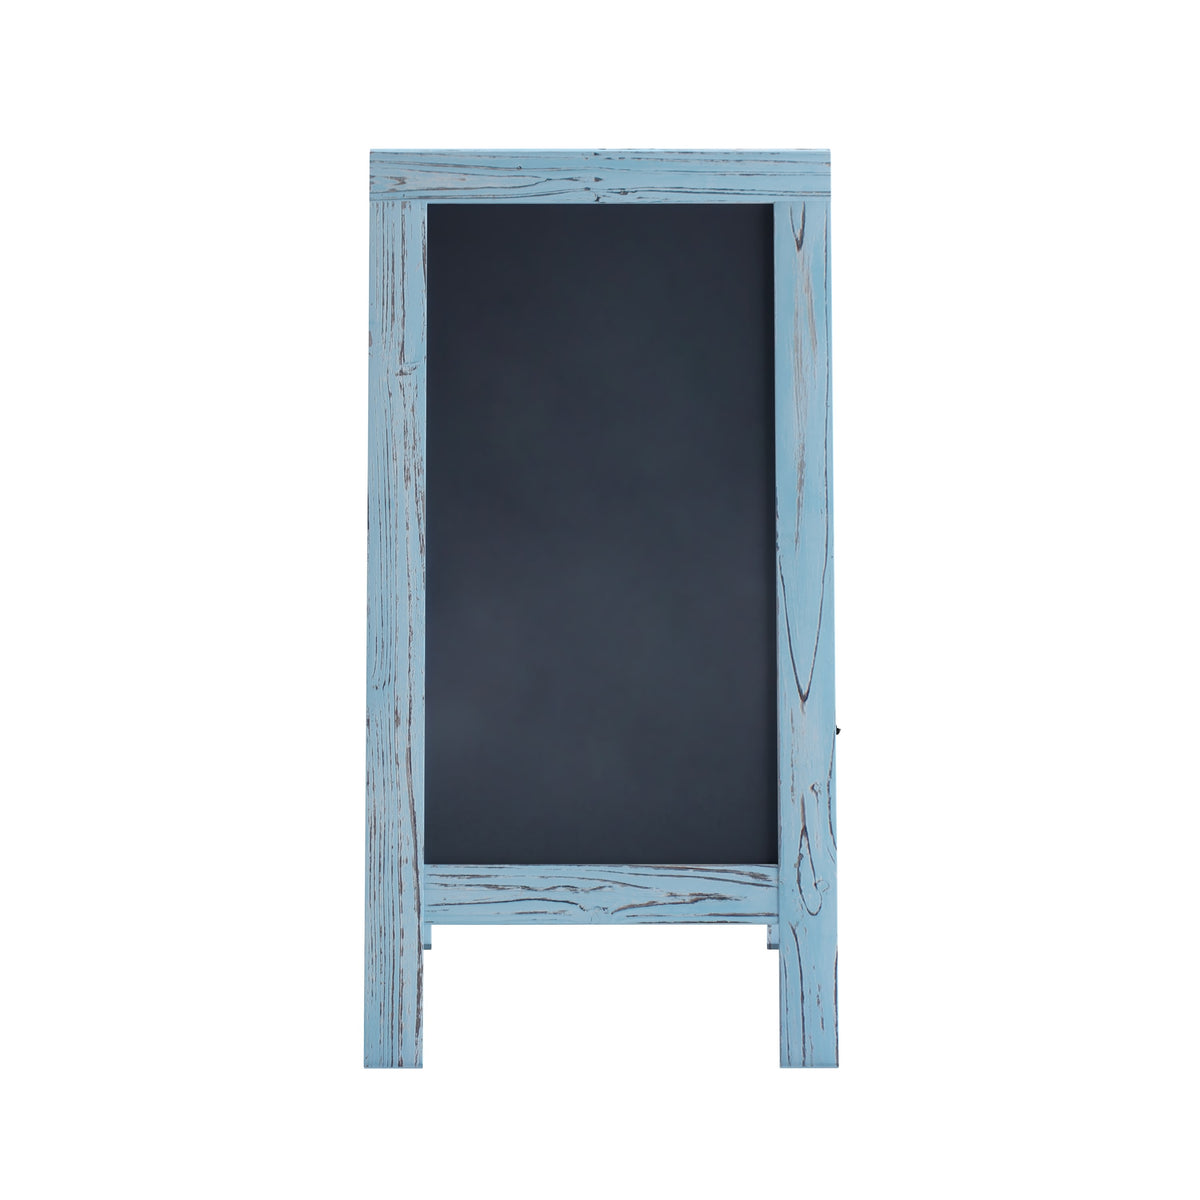 Robin Blue,40inchH x 20inchW |#| Indoor/Outdoor 40x20 Freestanding Robin Blue Wood A-Frame Magnetic Chalkboard